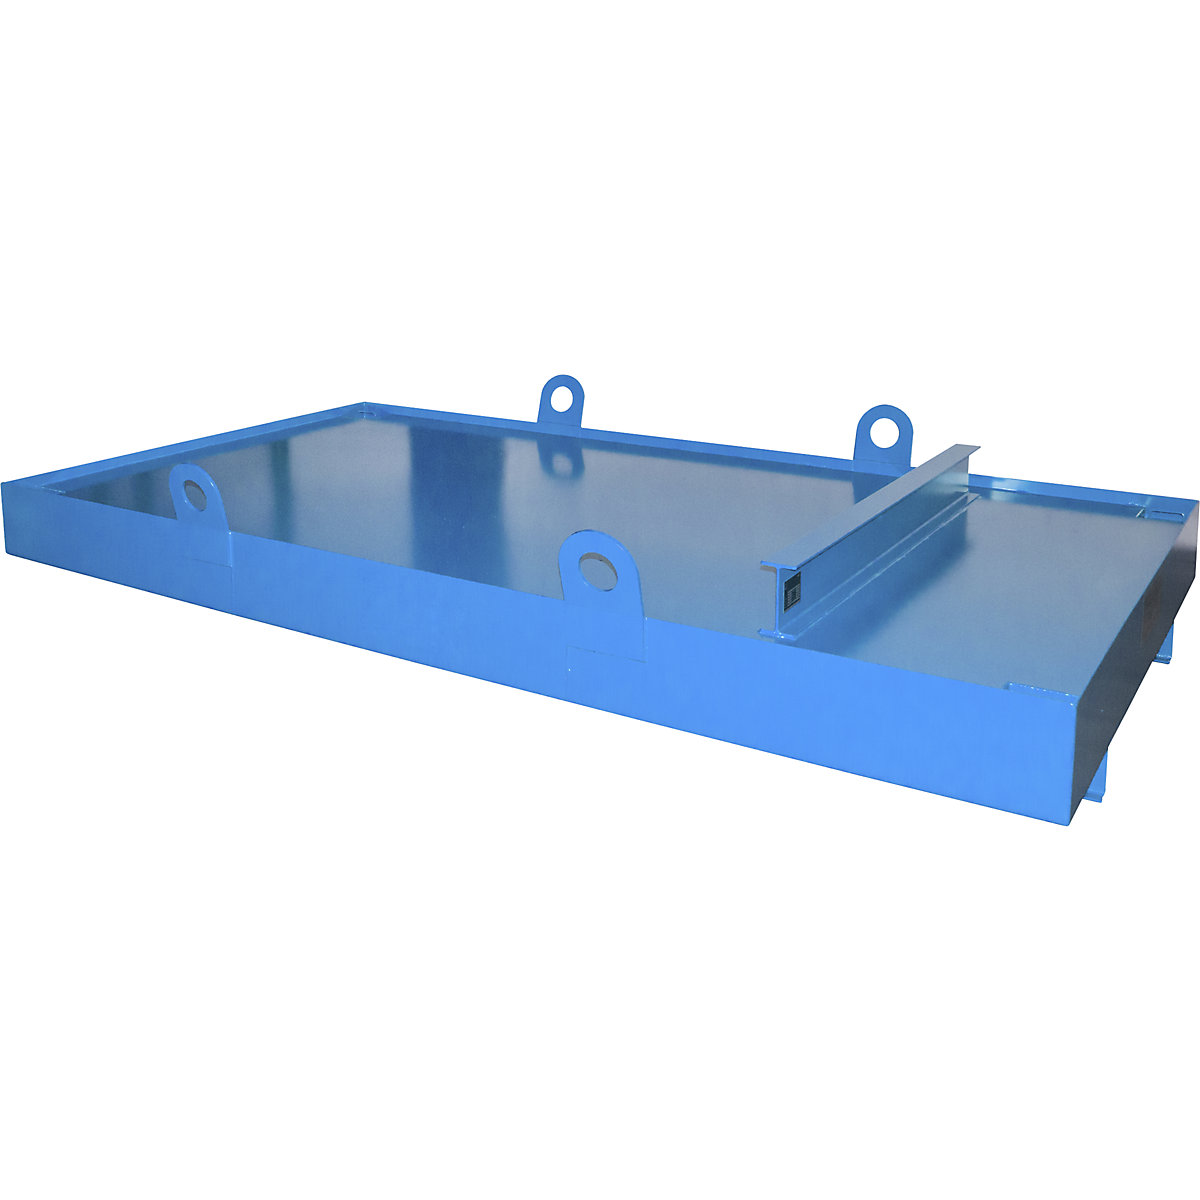 Sump tray for skip trailer – eurokraft pro, for skip trailers, sump capacity 1276 l, blue-5